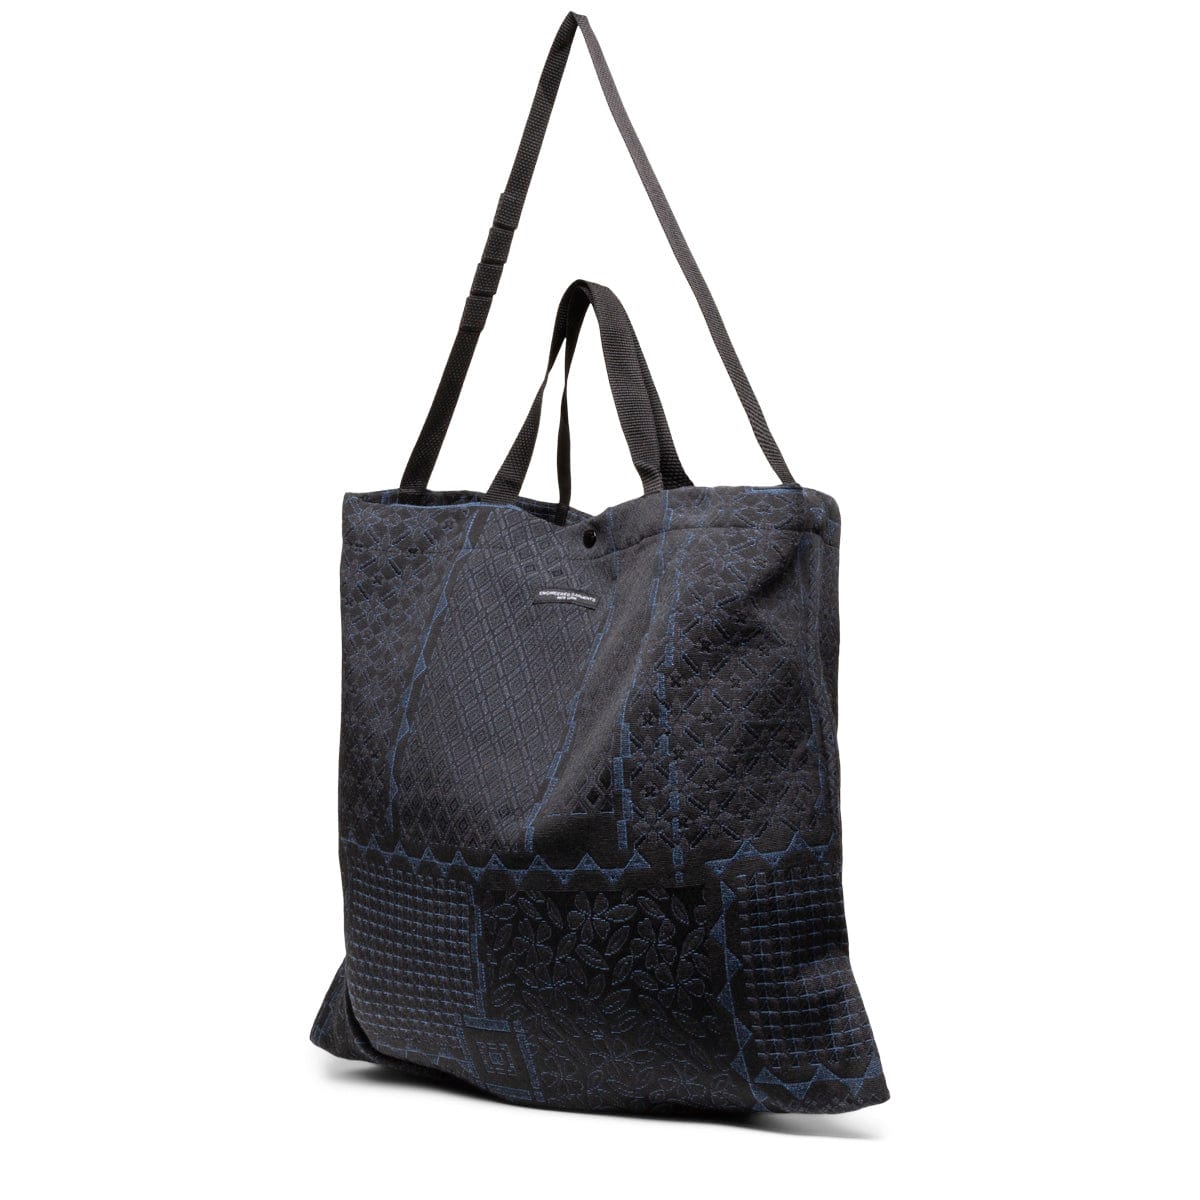 Carry-All Handwoven Tote Black